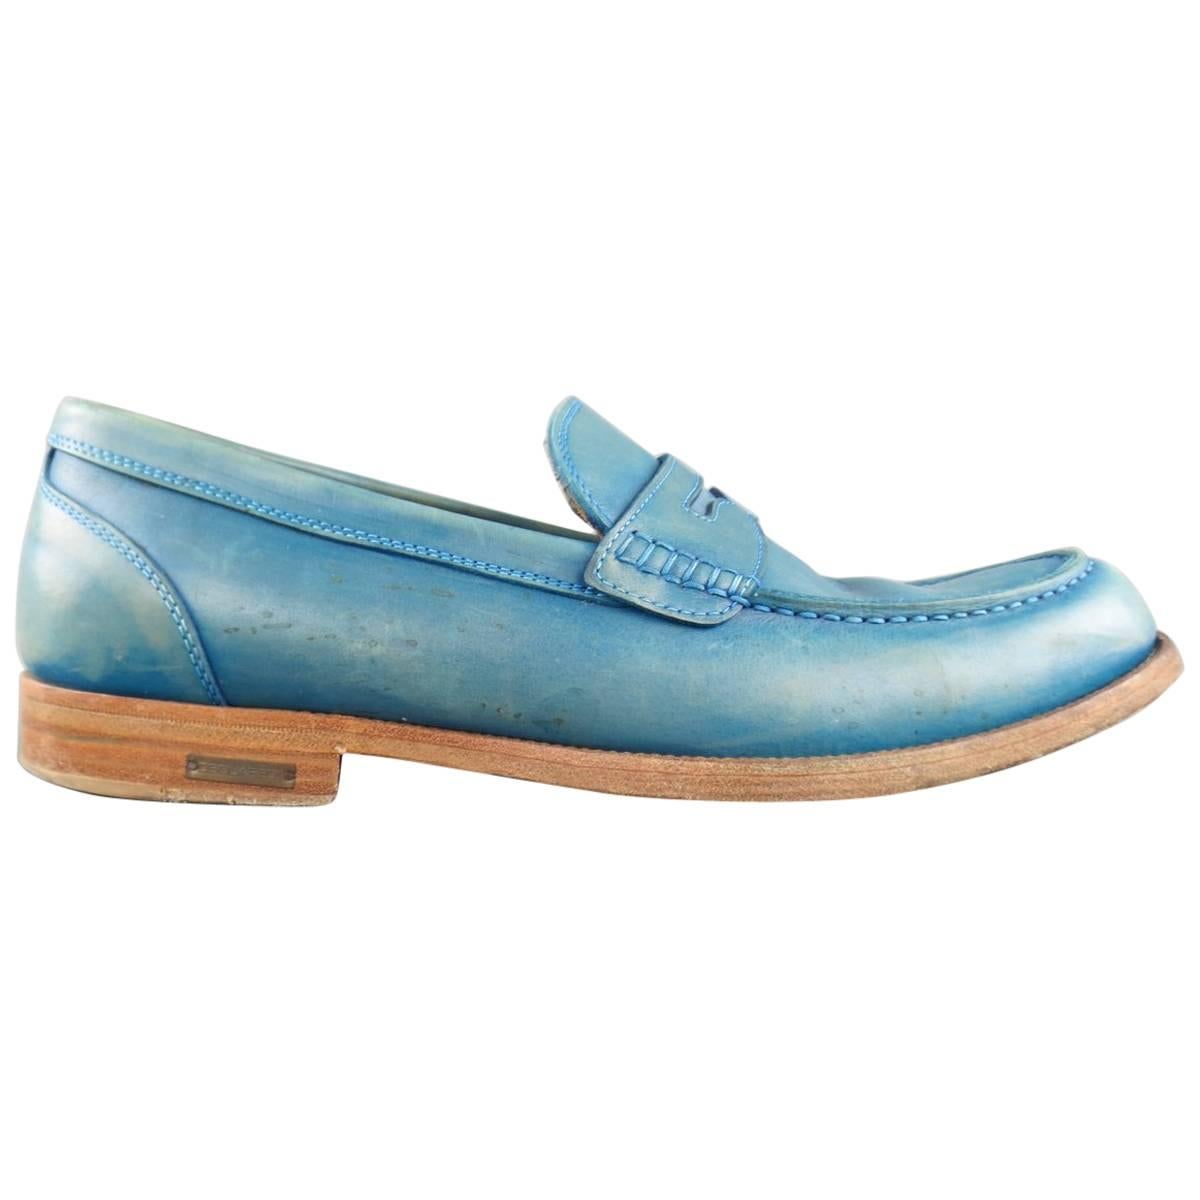 Men's DSQUARED2 Size 9.5 Teal Blue Distressed Leather Penny Loafers